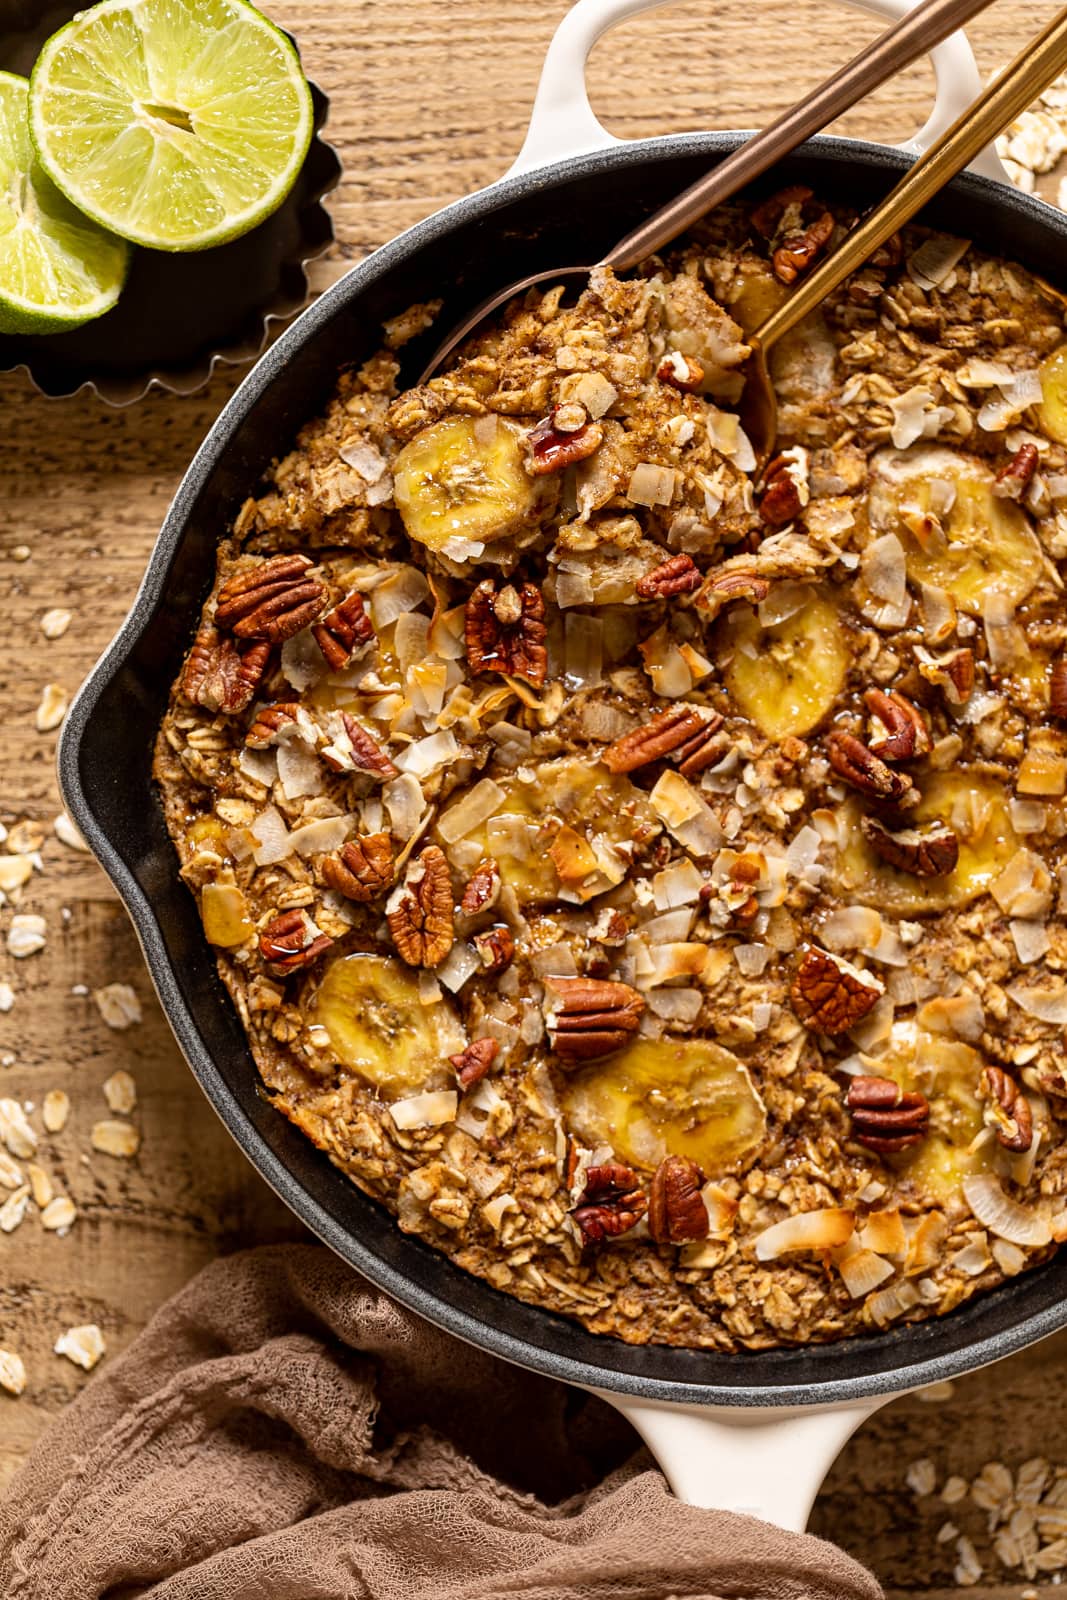 Spoons scooping Jamaican-inspired Banana Bread Baked Oatmeal out of a pan